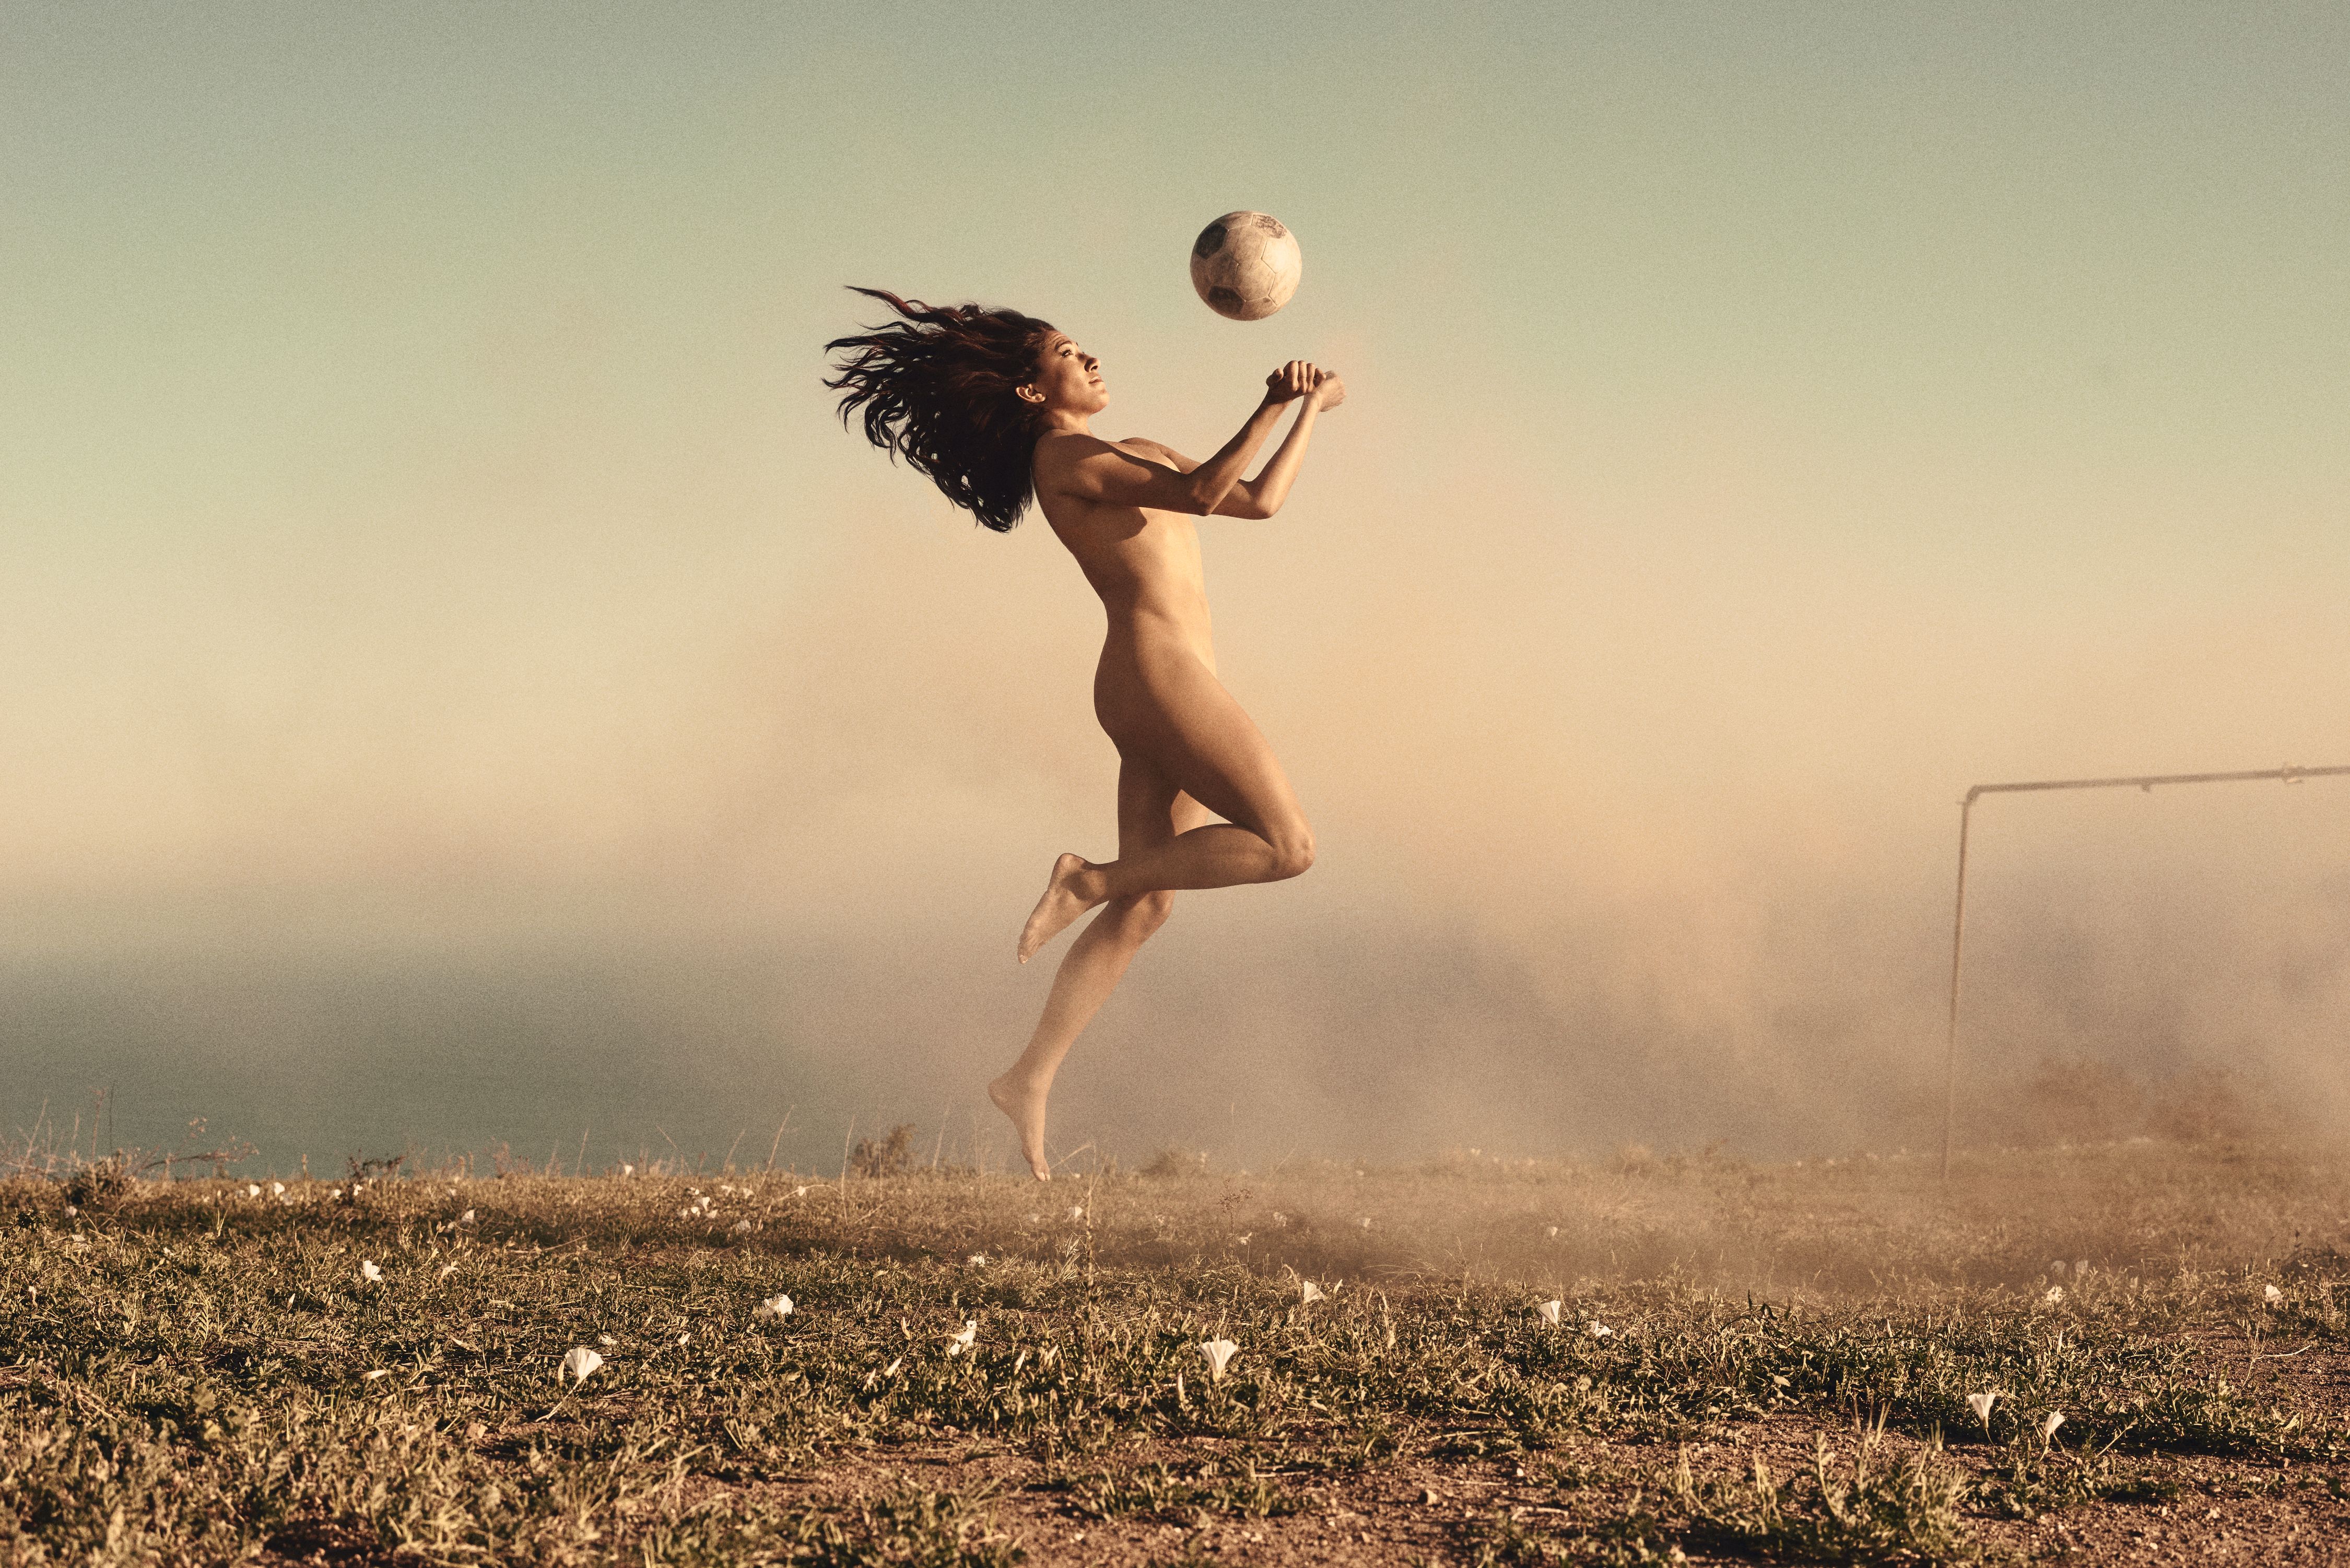 View hi-res photos of Body Issue 2016: Christen Press Behind the Scenes on ...